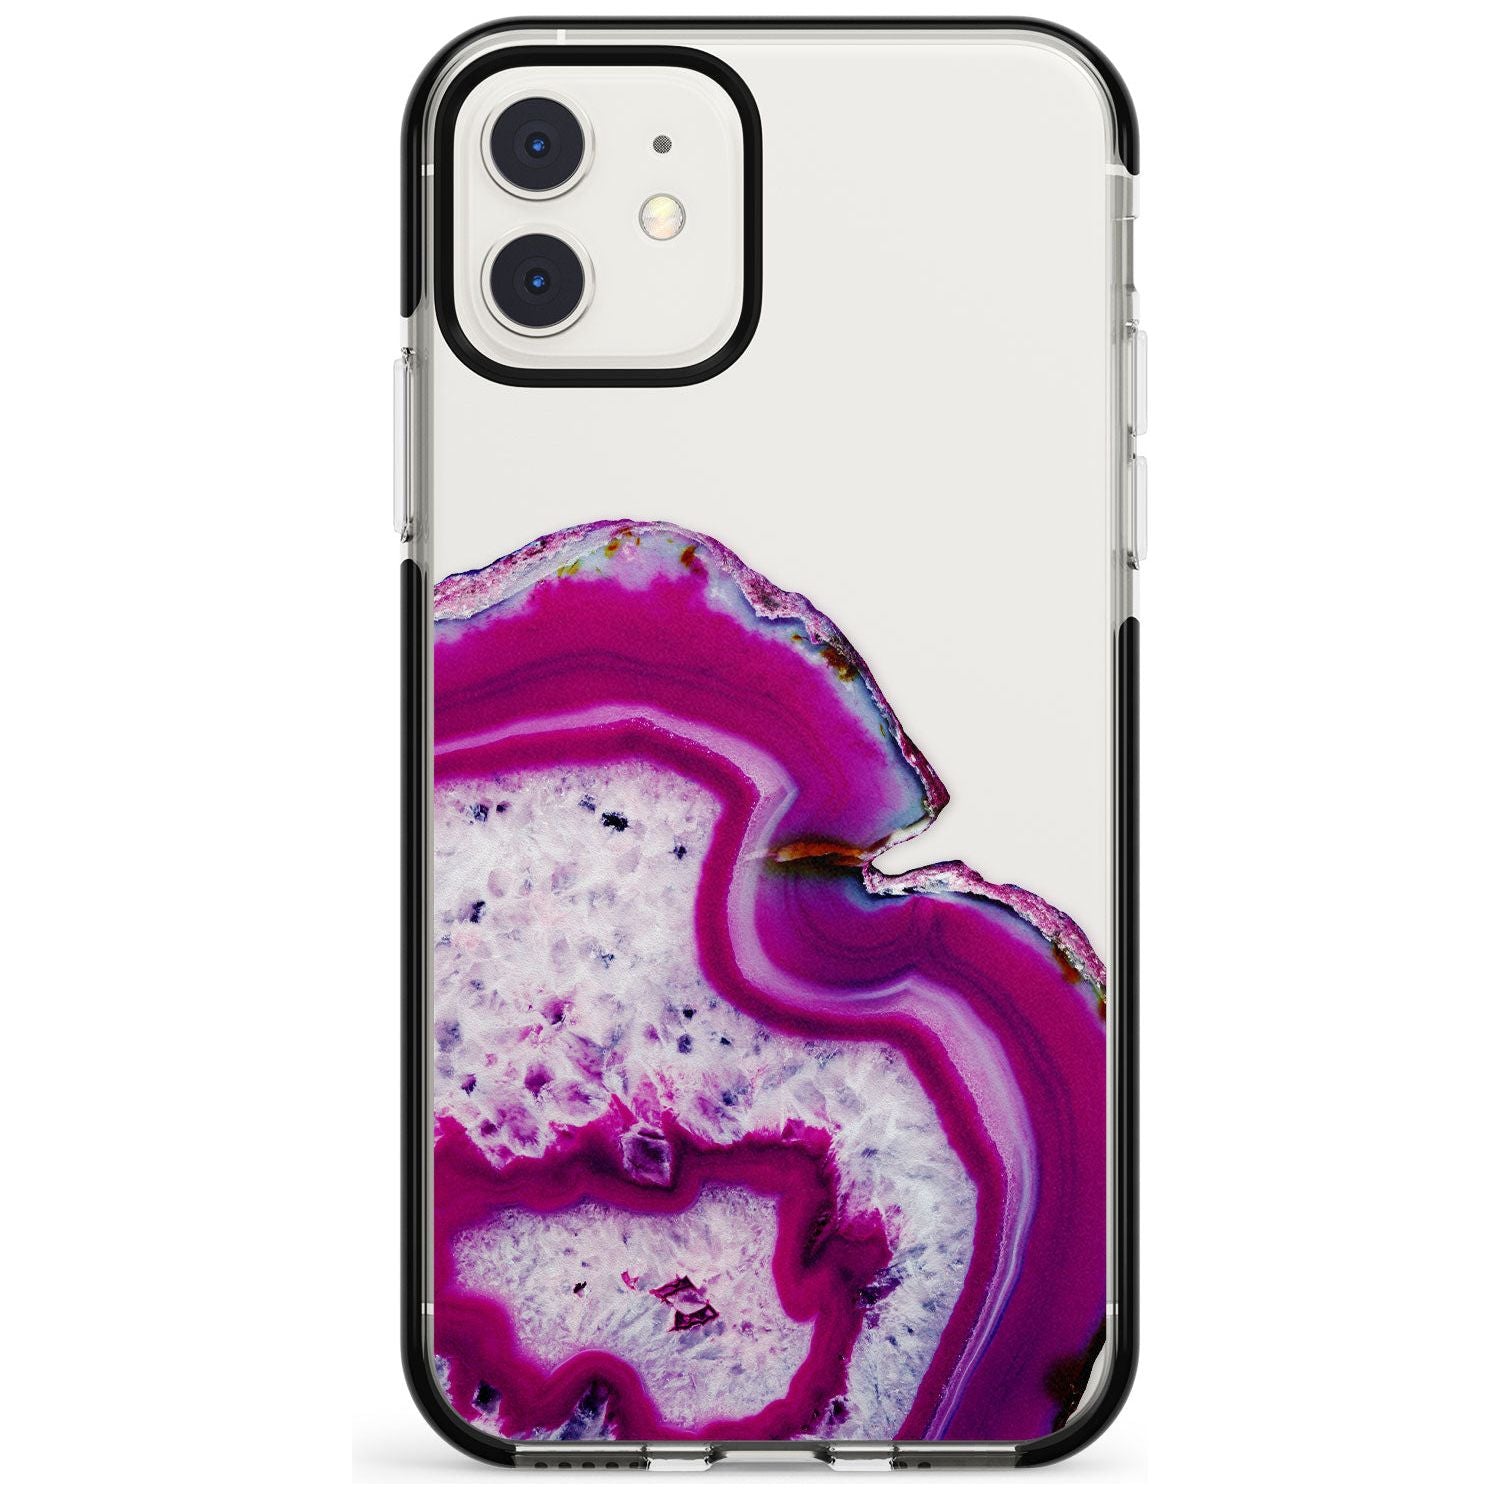 Violet & White Swirl Agate Crystal Clear Design Black Impact Phone Case for iPhone 11